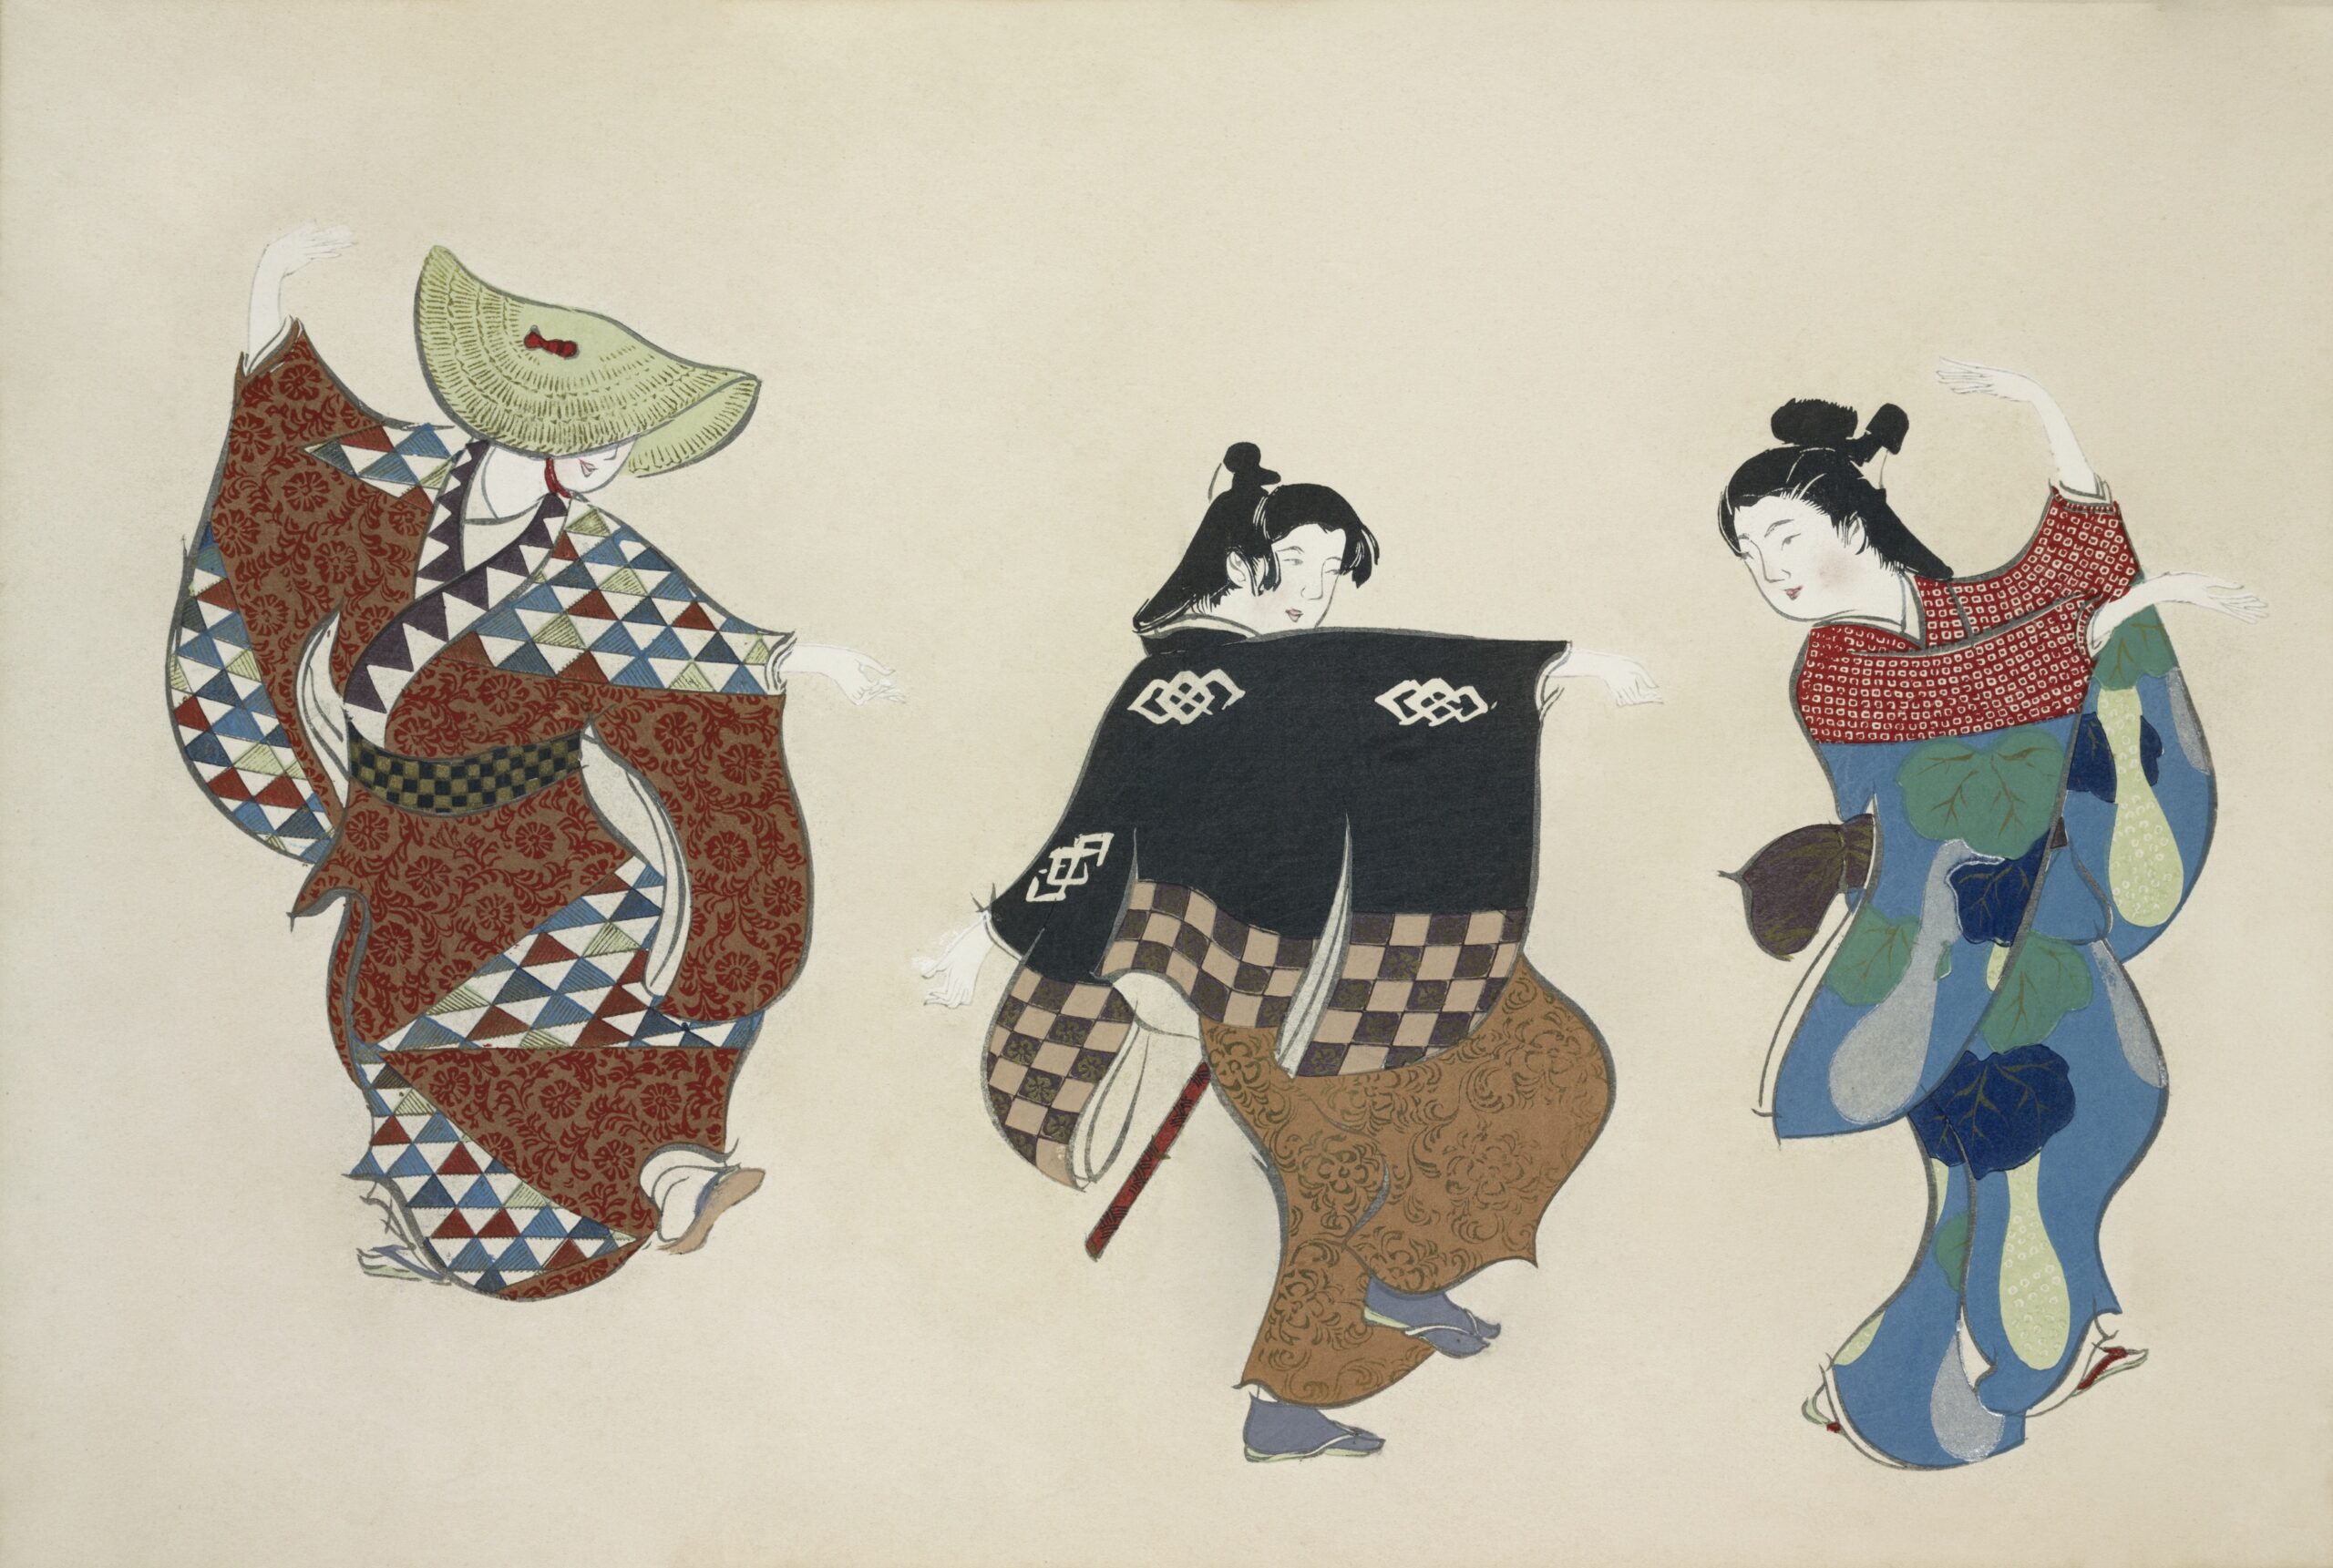 Dancers from Momoyogusa–Flowers of a Hundred Generations (1909) by Kamisaka Sekka. Original from the The New York Public Library. Digitally enhanced by rawpixel.